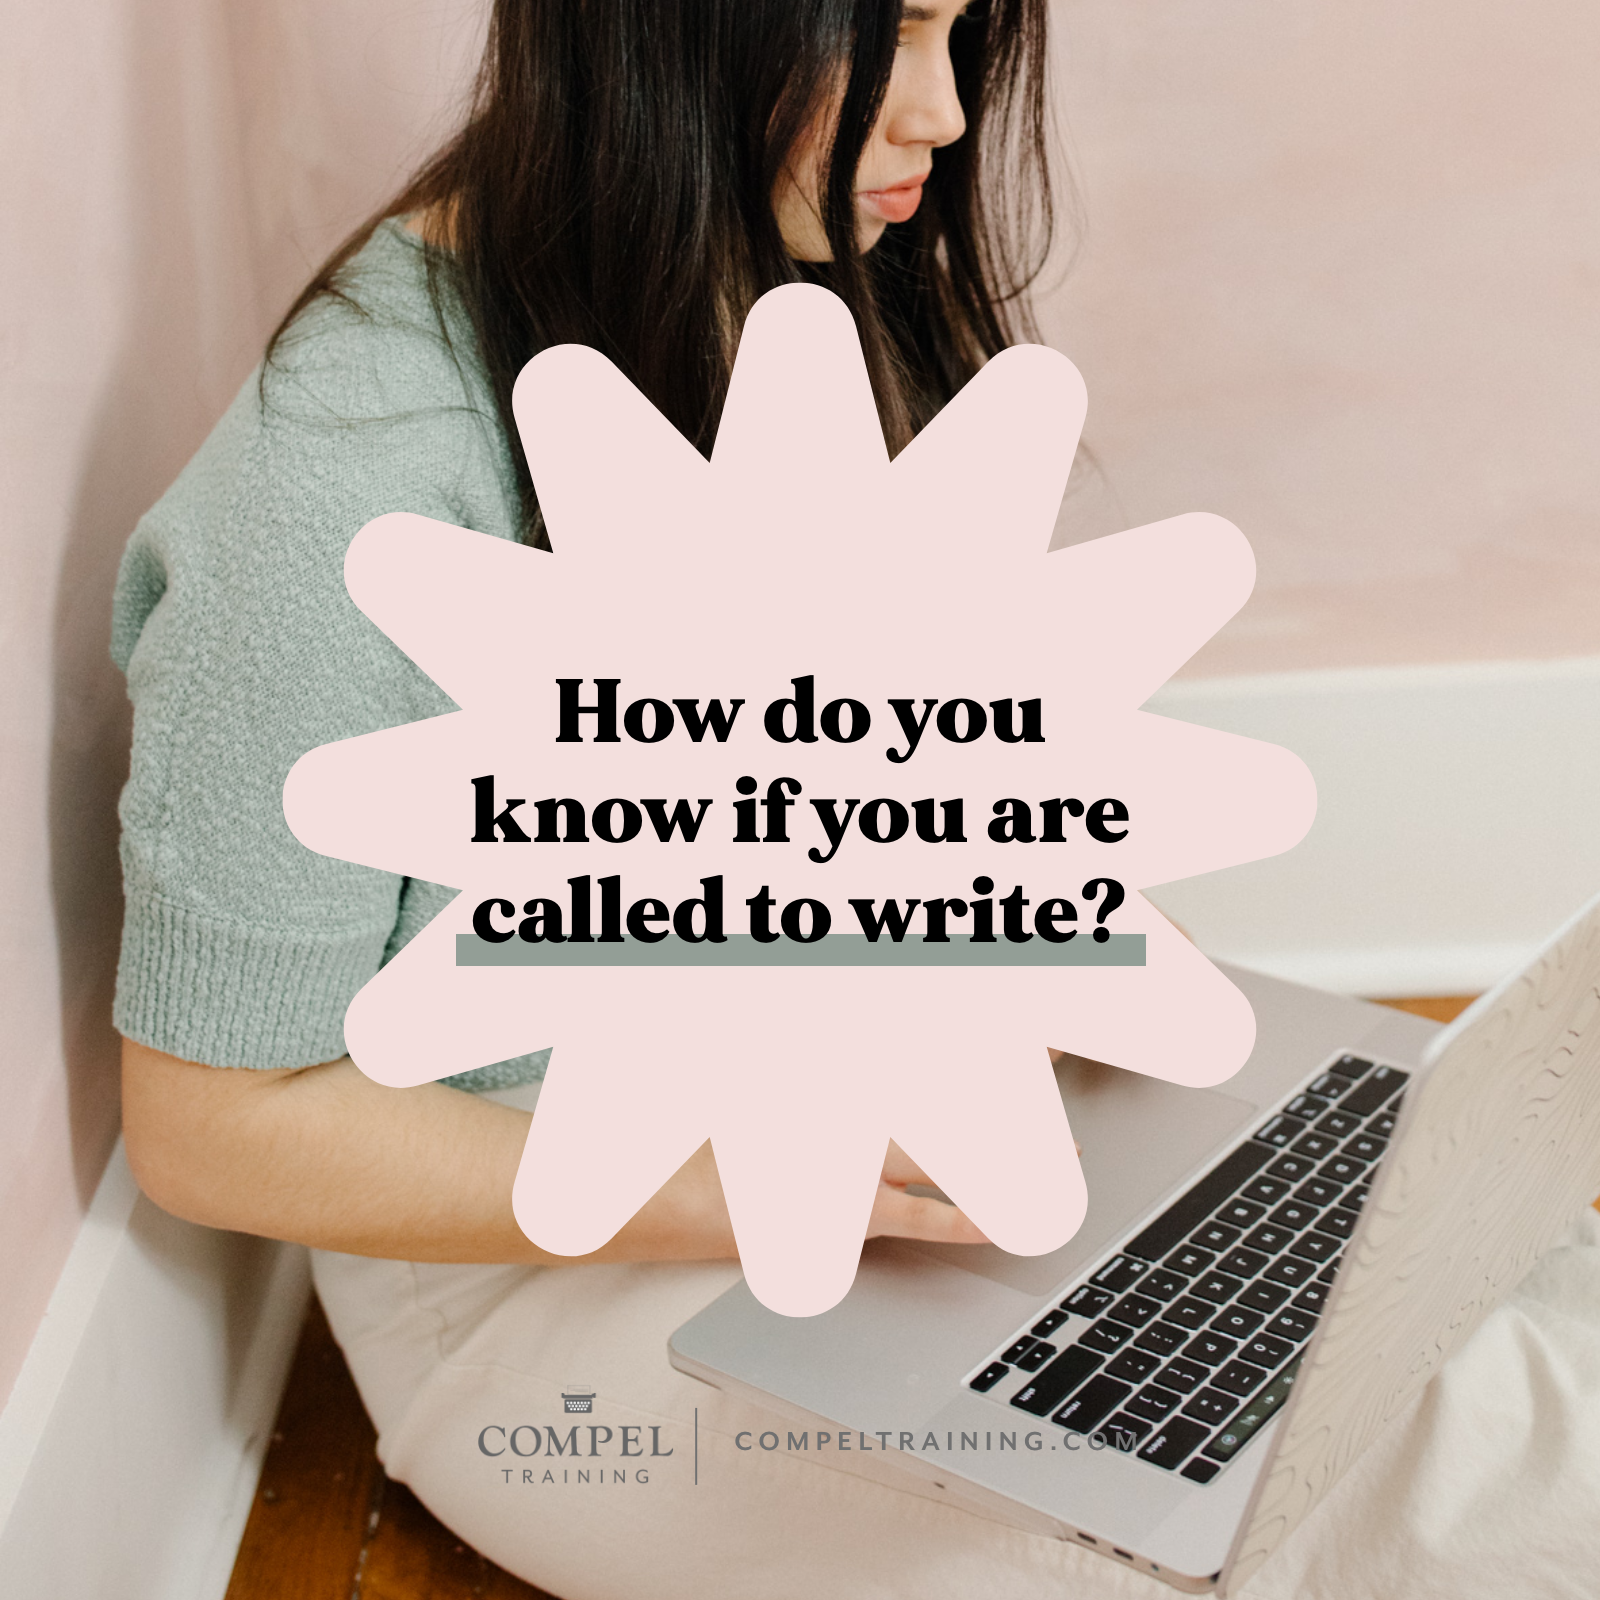 How do you know if you are called to write?